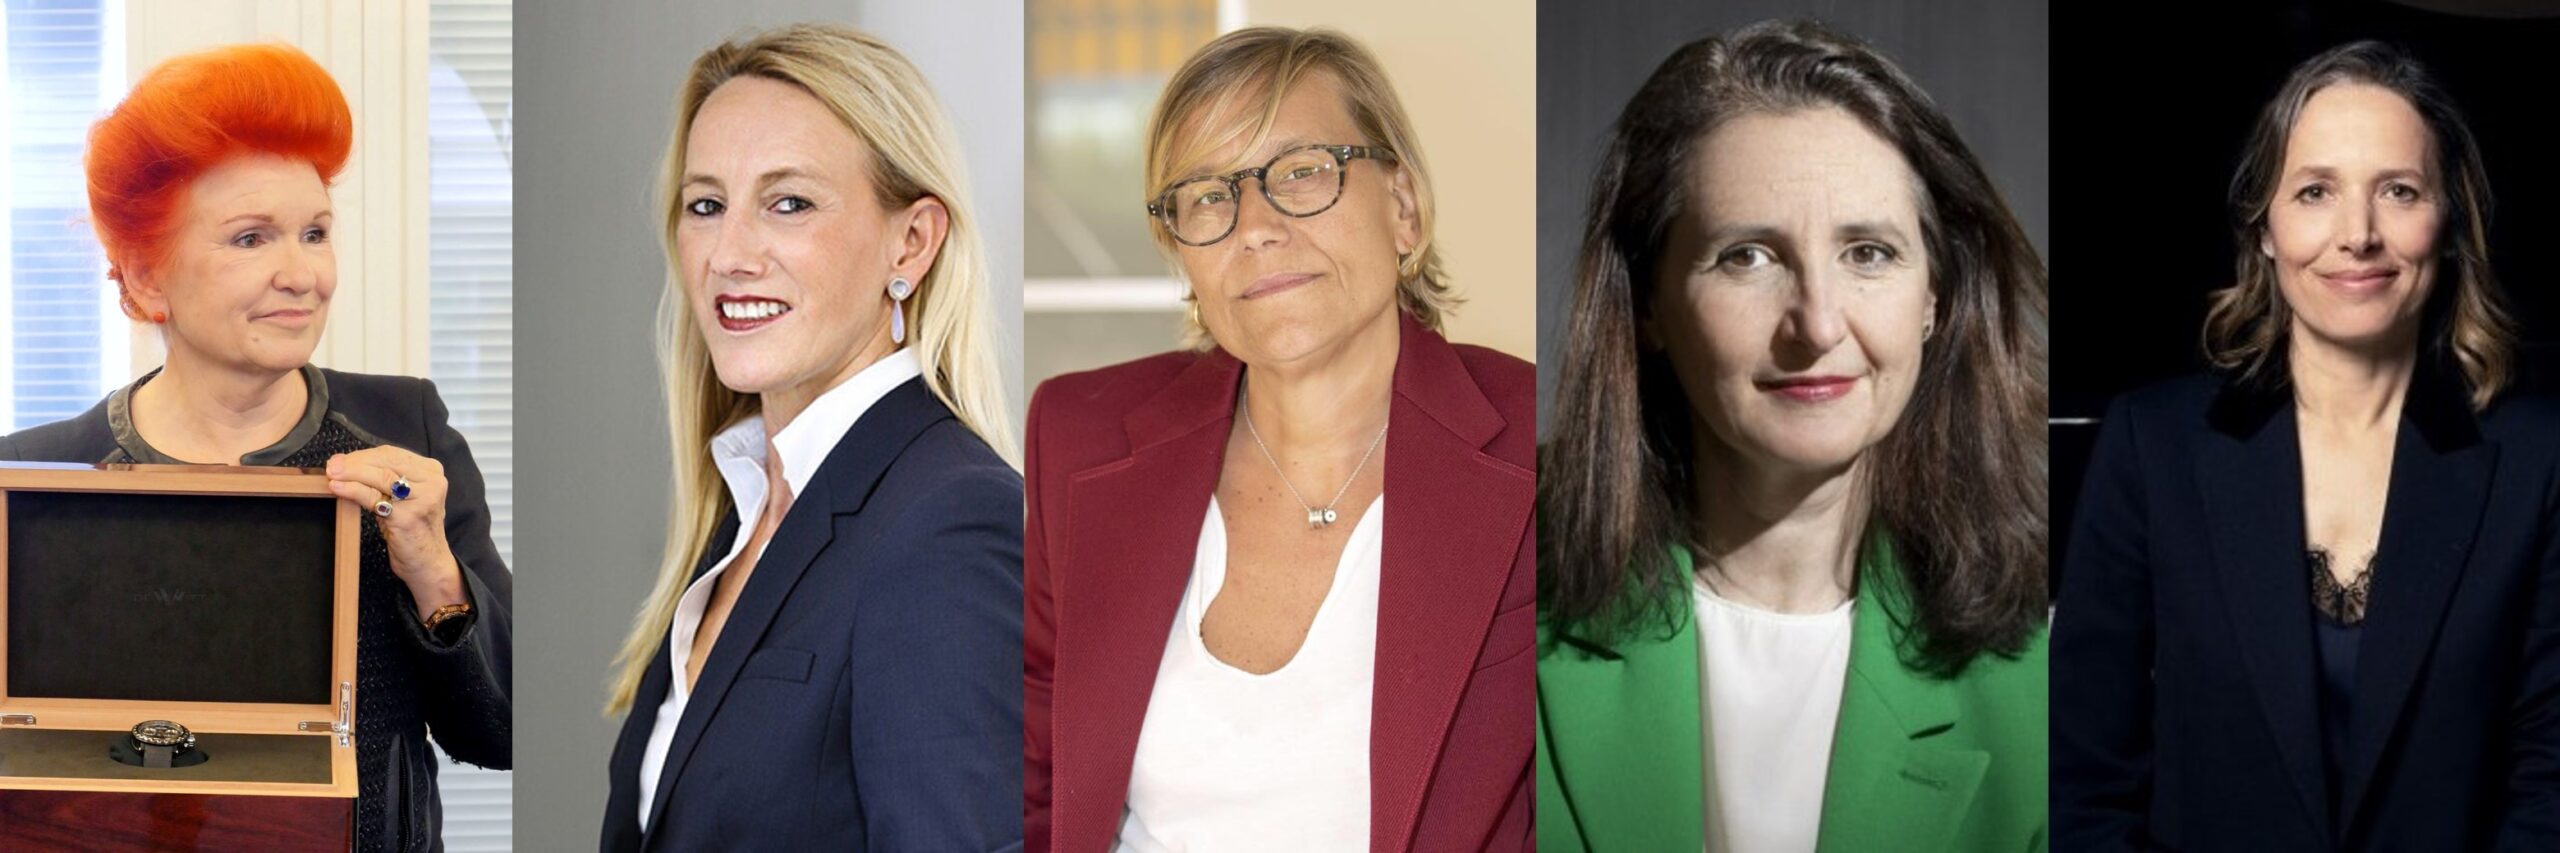 Women CEOs at the Helm: Has the “Course” of Fine Watchmaking Changed?